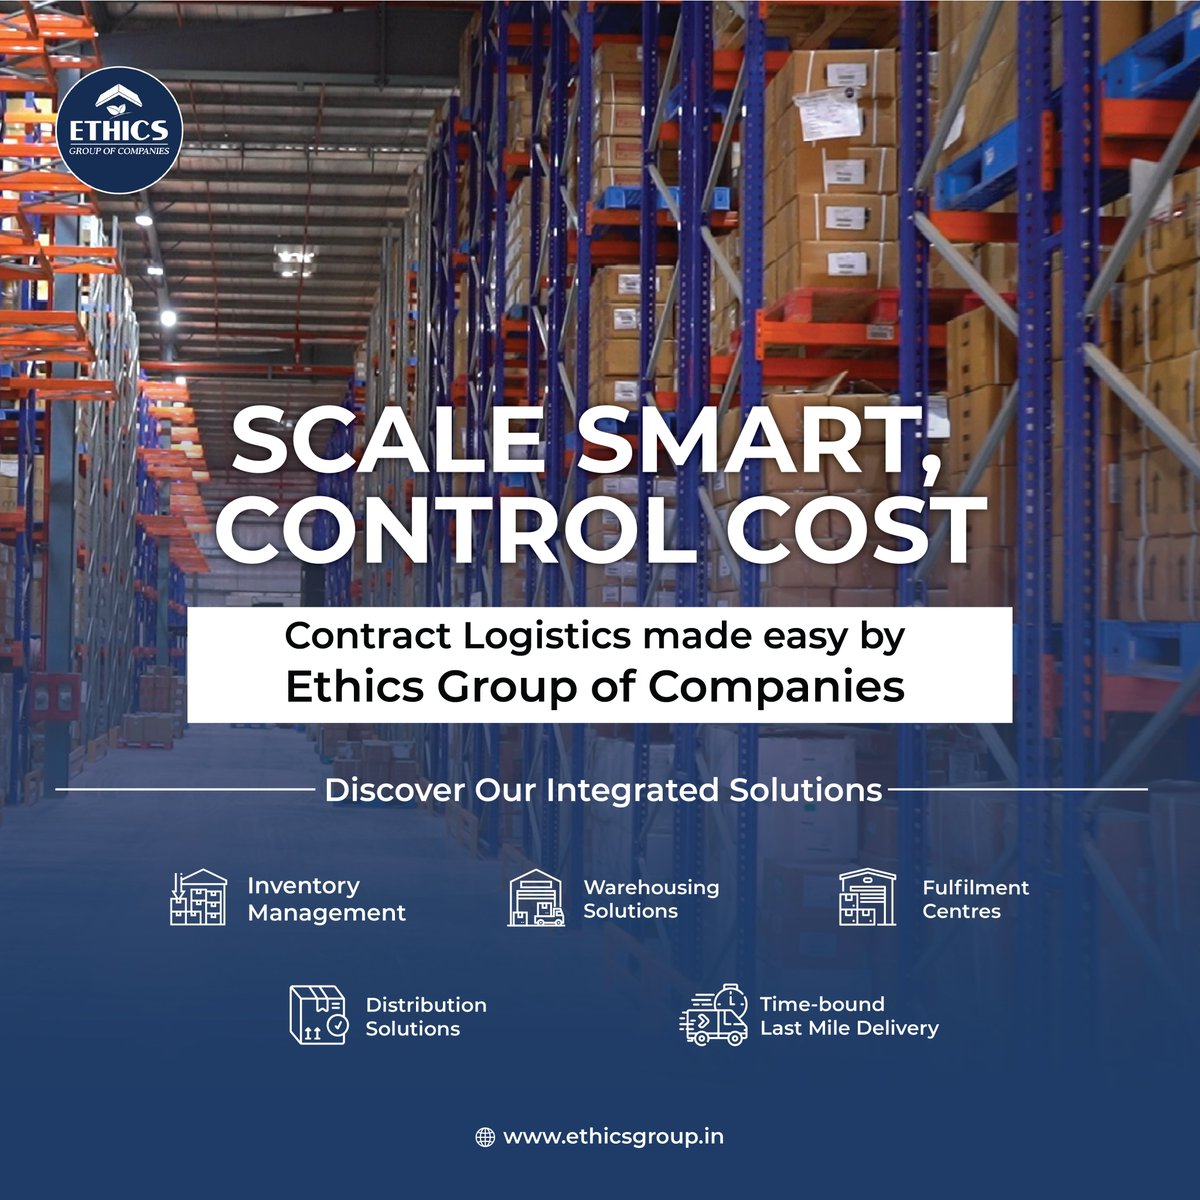 Ethics Group of Companies: Provides comprehensive contract logistics solutions powered by cutting-edge technology.
.
For more details:
🌐: ethicsgroup.in
.
#ethicsgroup #warehousemanagement #warehousesolutions #supplychainservices #lastmilelogistics #contractlogistics